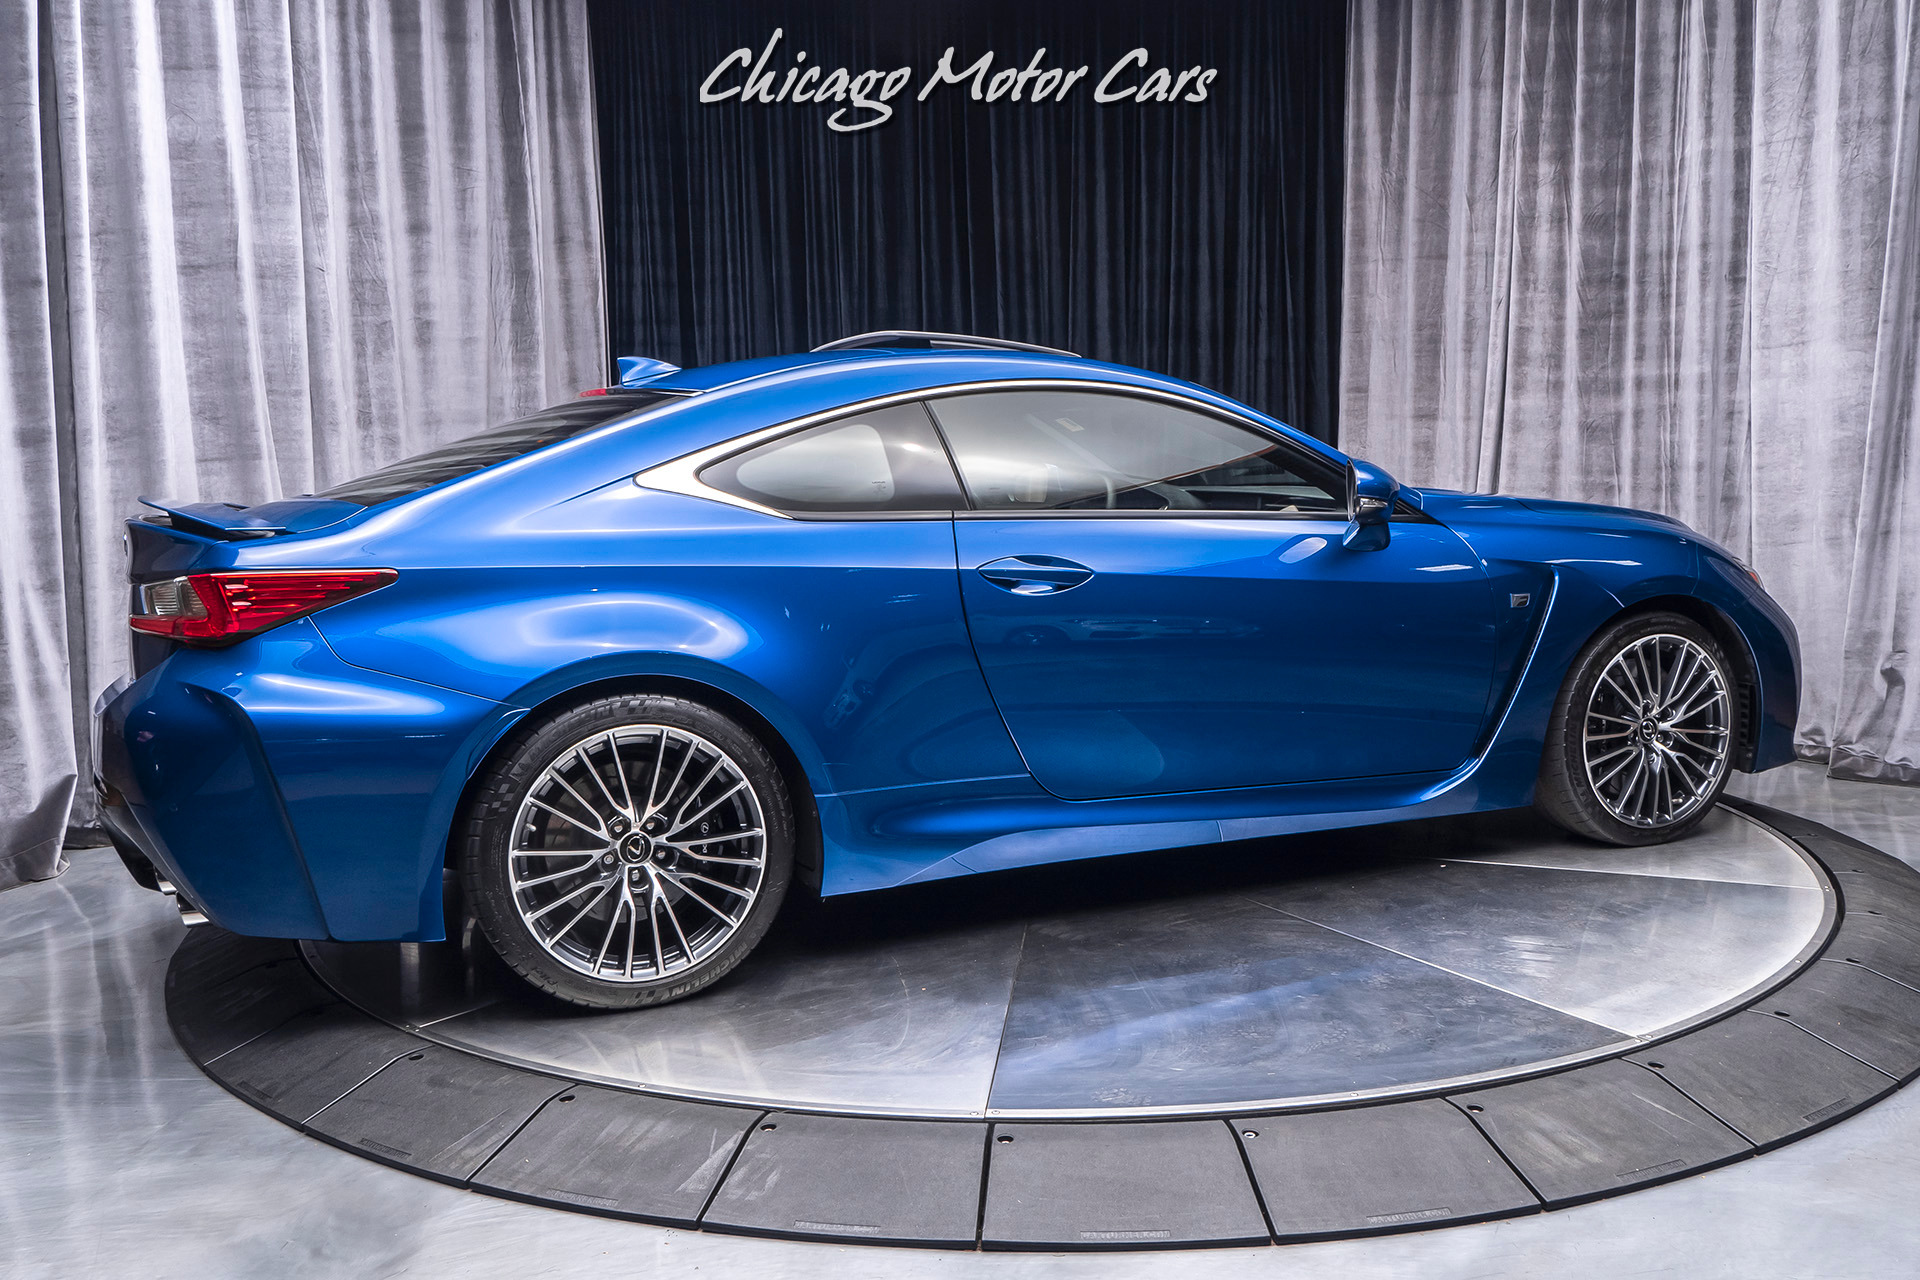 Used-2015-Lexus-RC-F-Coupe-ULTRASONIC-BLUE-MICA-20-PAINT